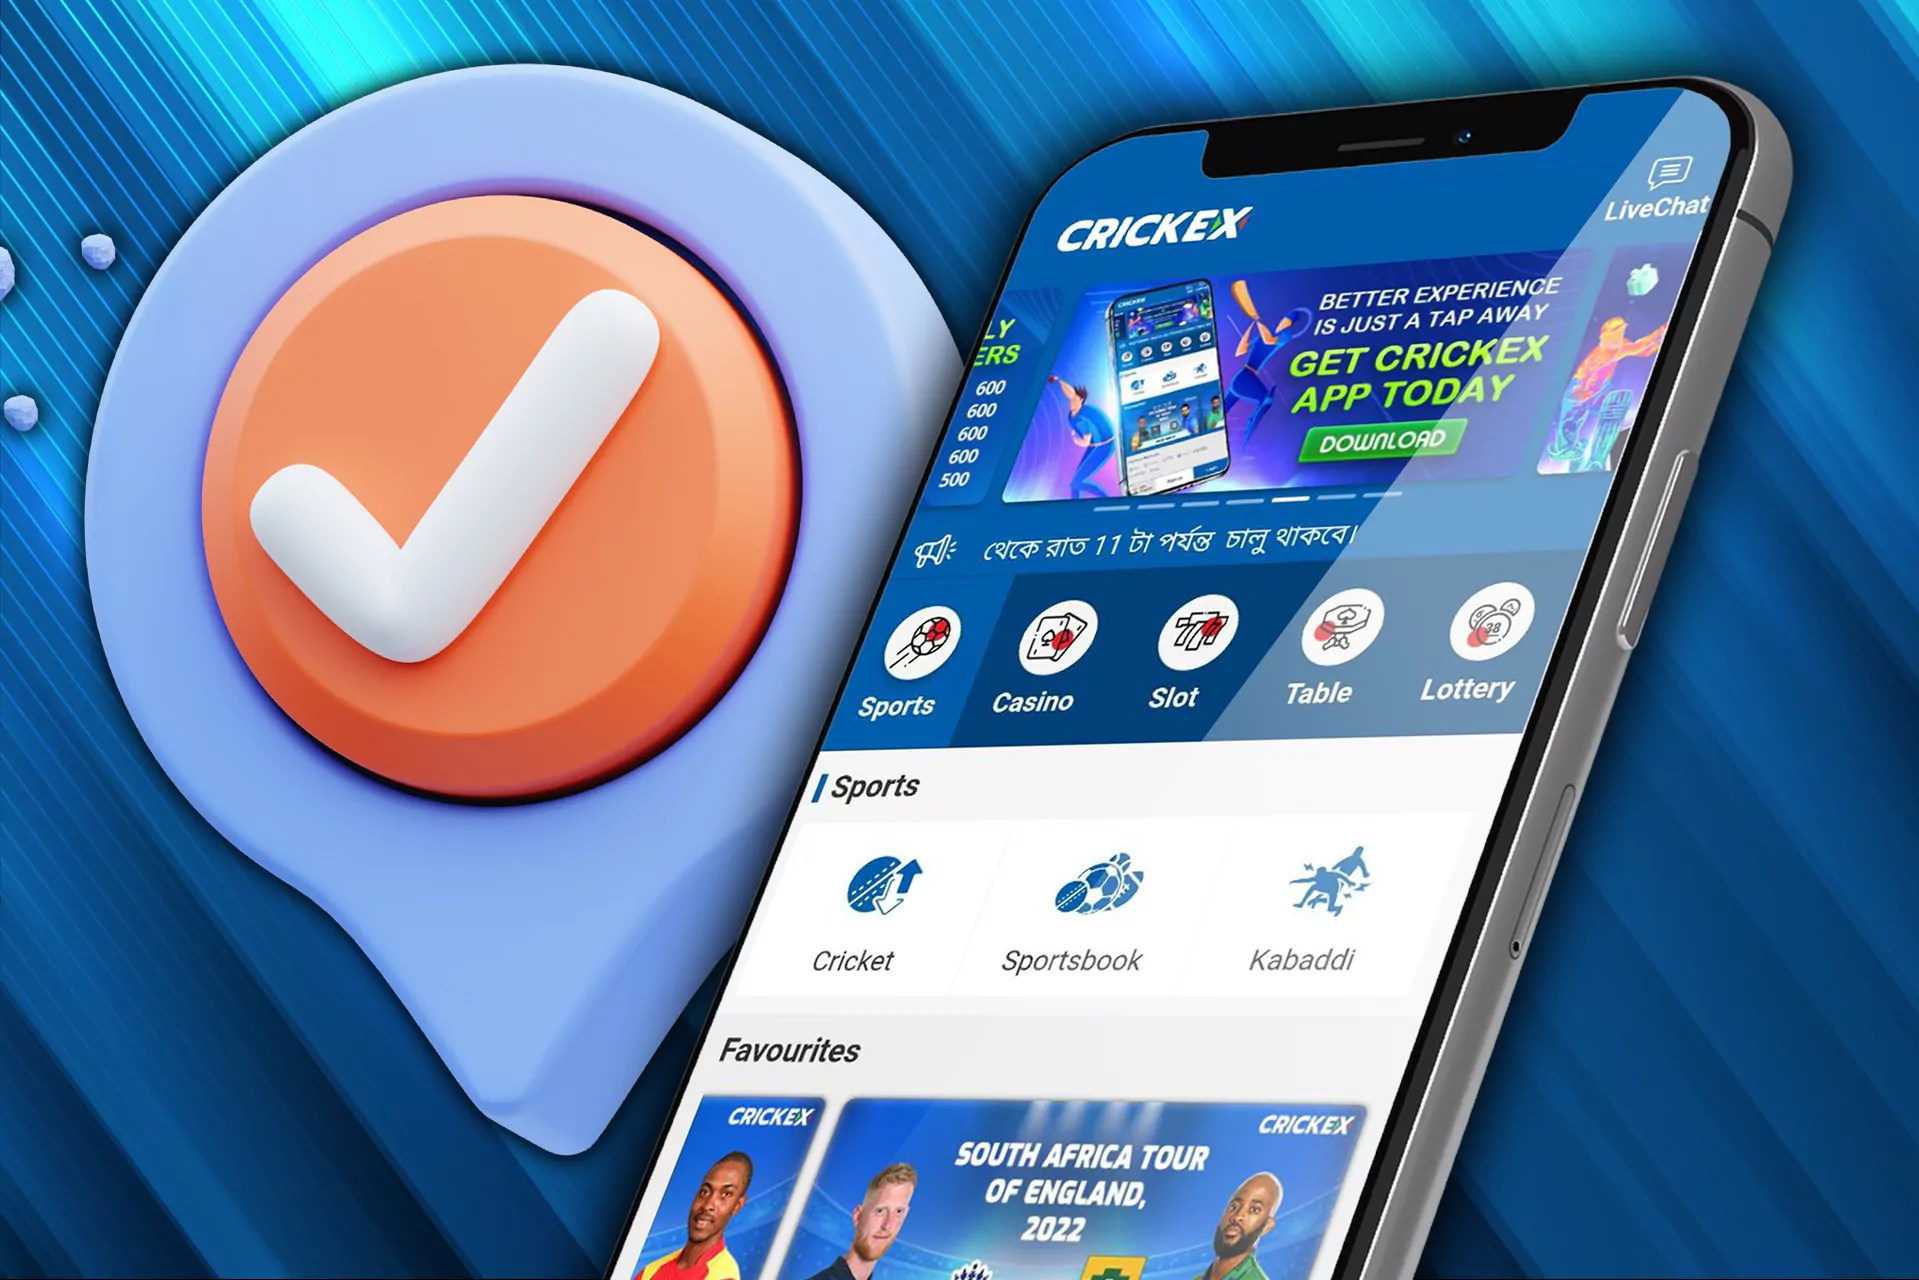 Download the Crickex app and place bets whenever you want.